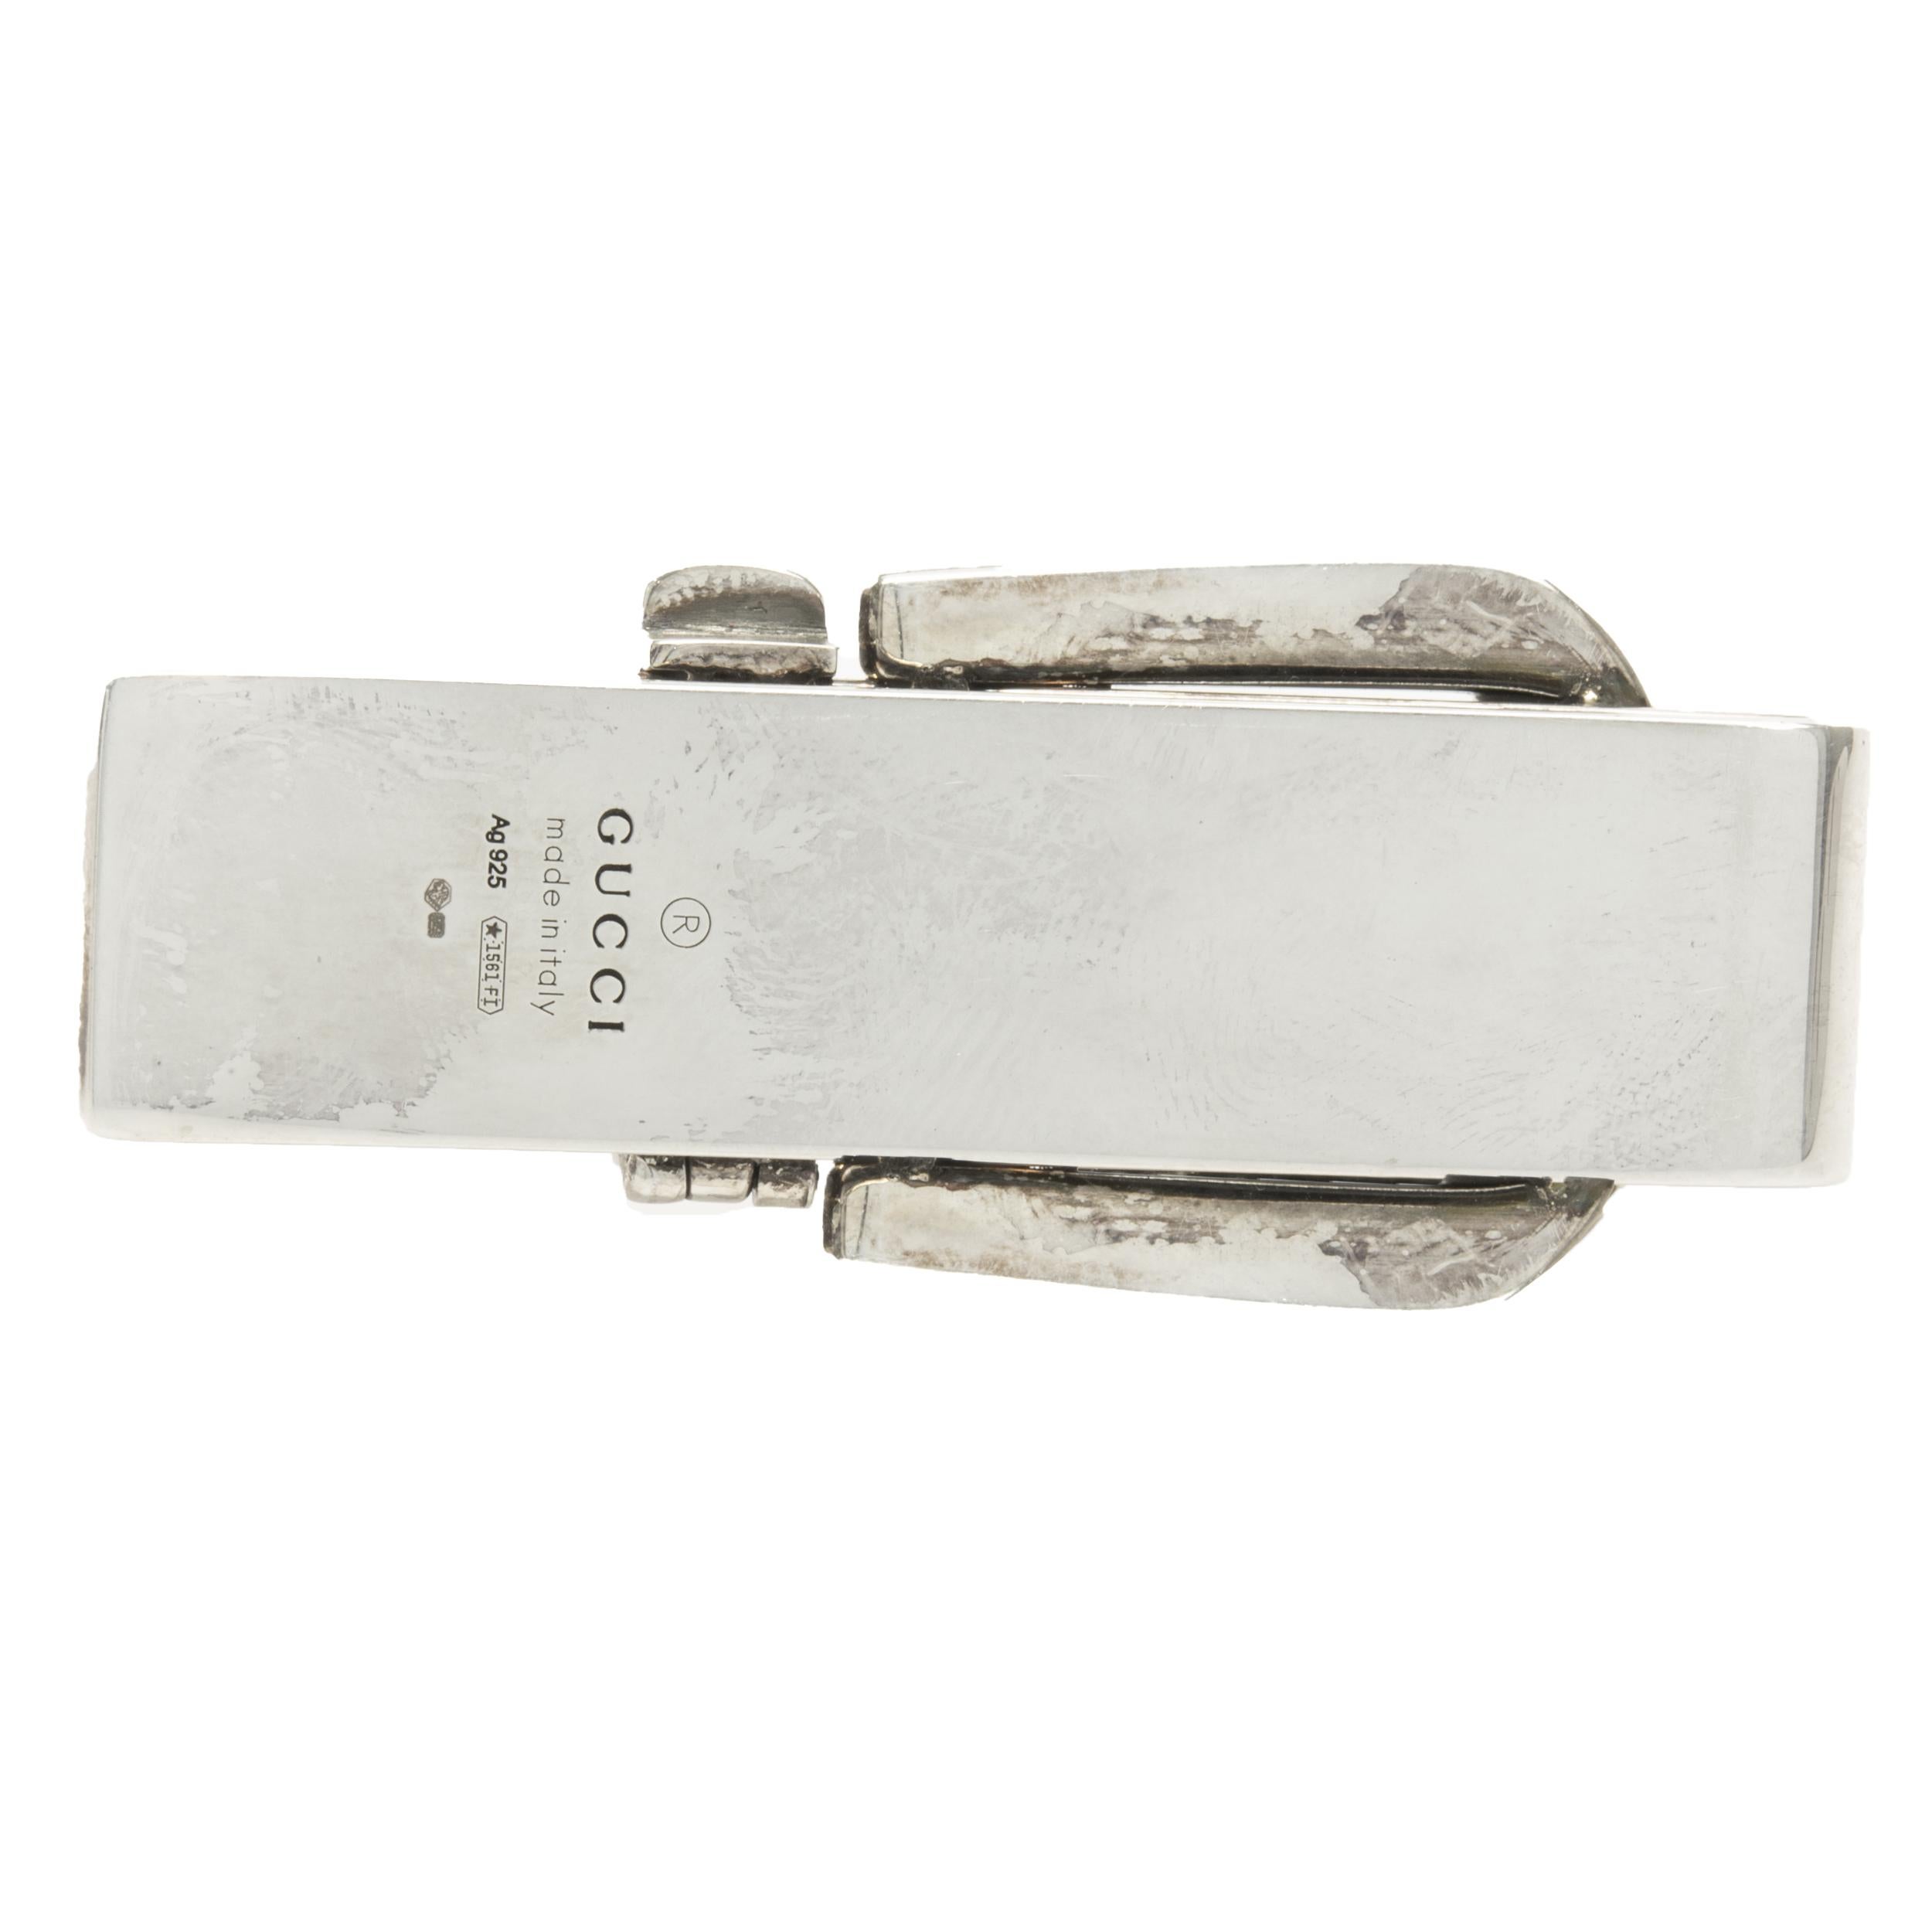 Designer: Gucci
Material: sterling silver
Weight: 33.24 grams
Dimensions: money clip measure 57.60 x 24.5mm